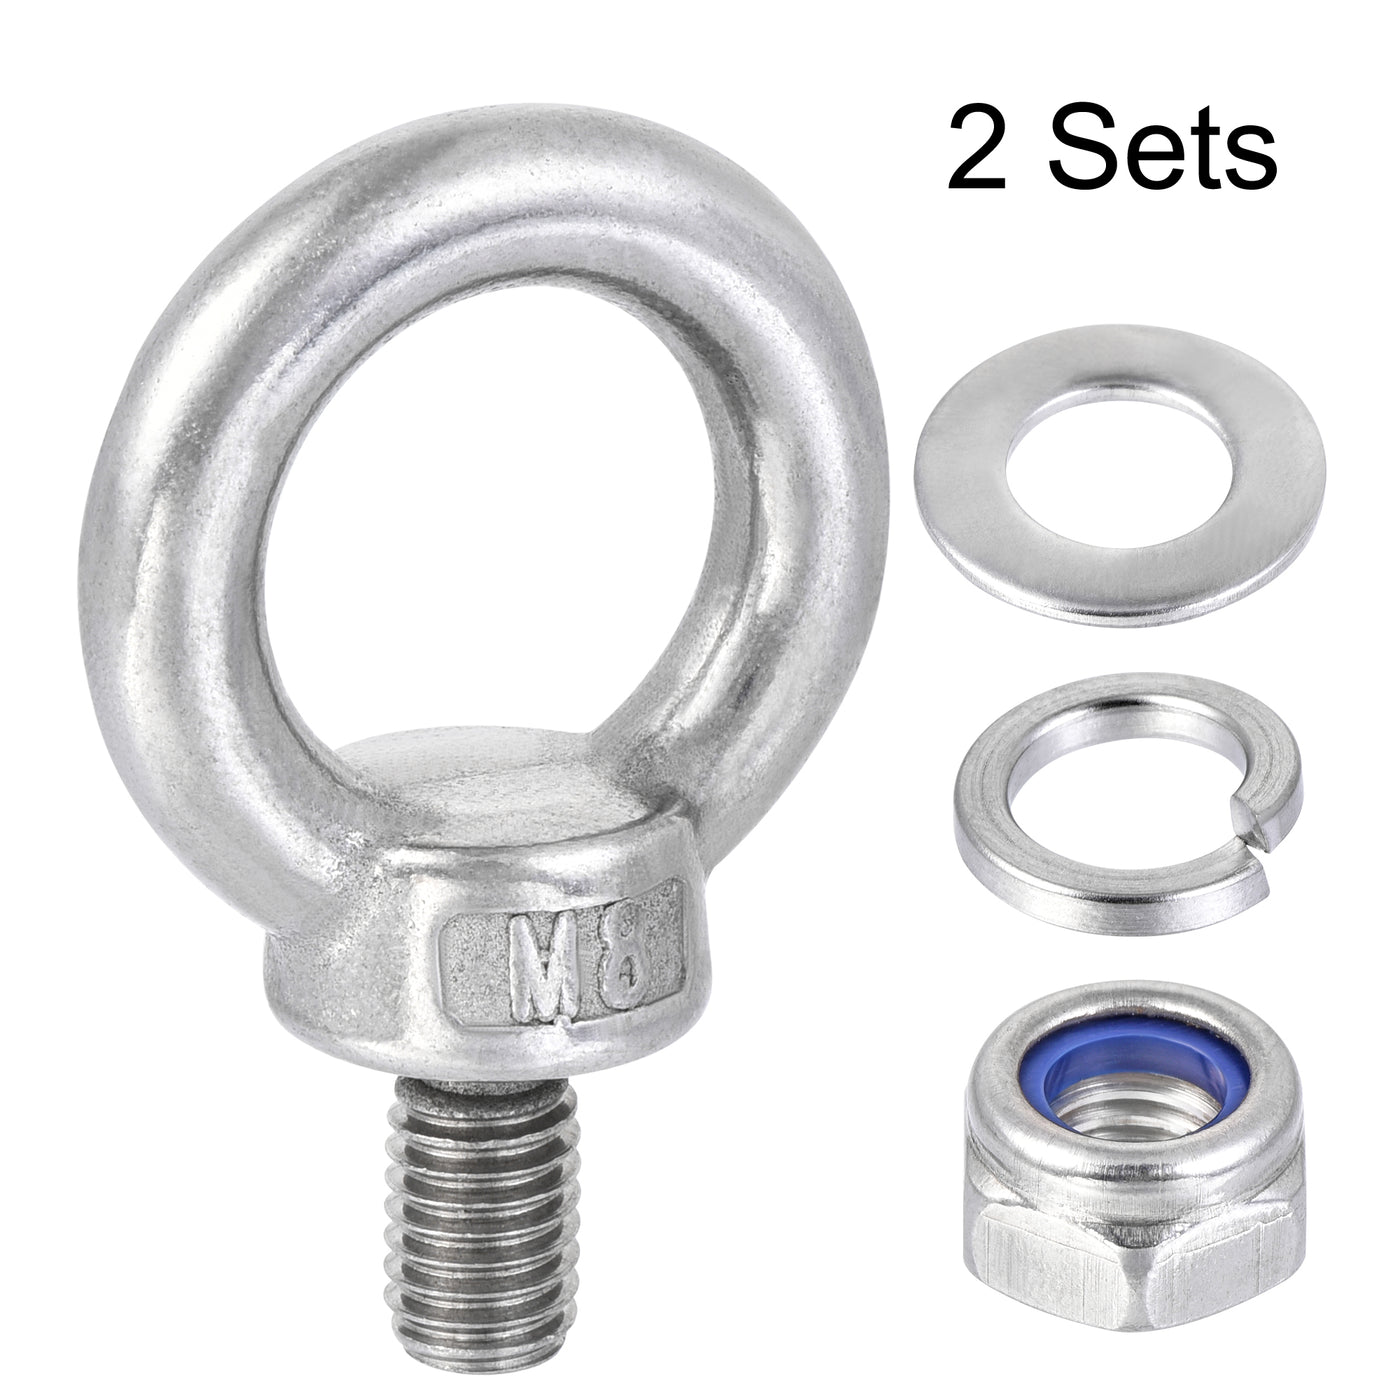 uxcell Uxcell Lifting Eye Bolt M8 x 14mm Male Thread with Hex Screw Nut Gasket Flat Washer for Hanging, 304 Stainless Steel, 2 Sets